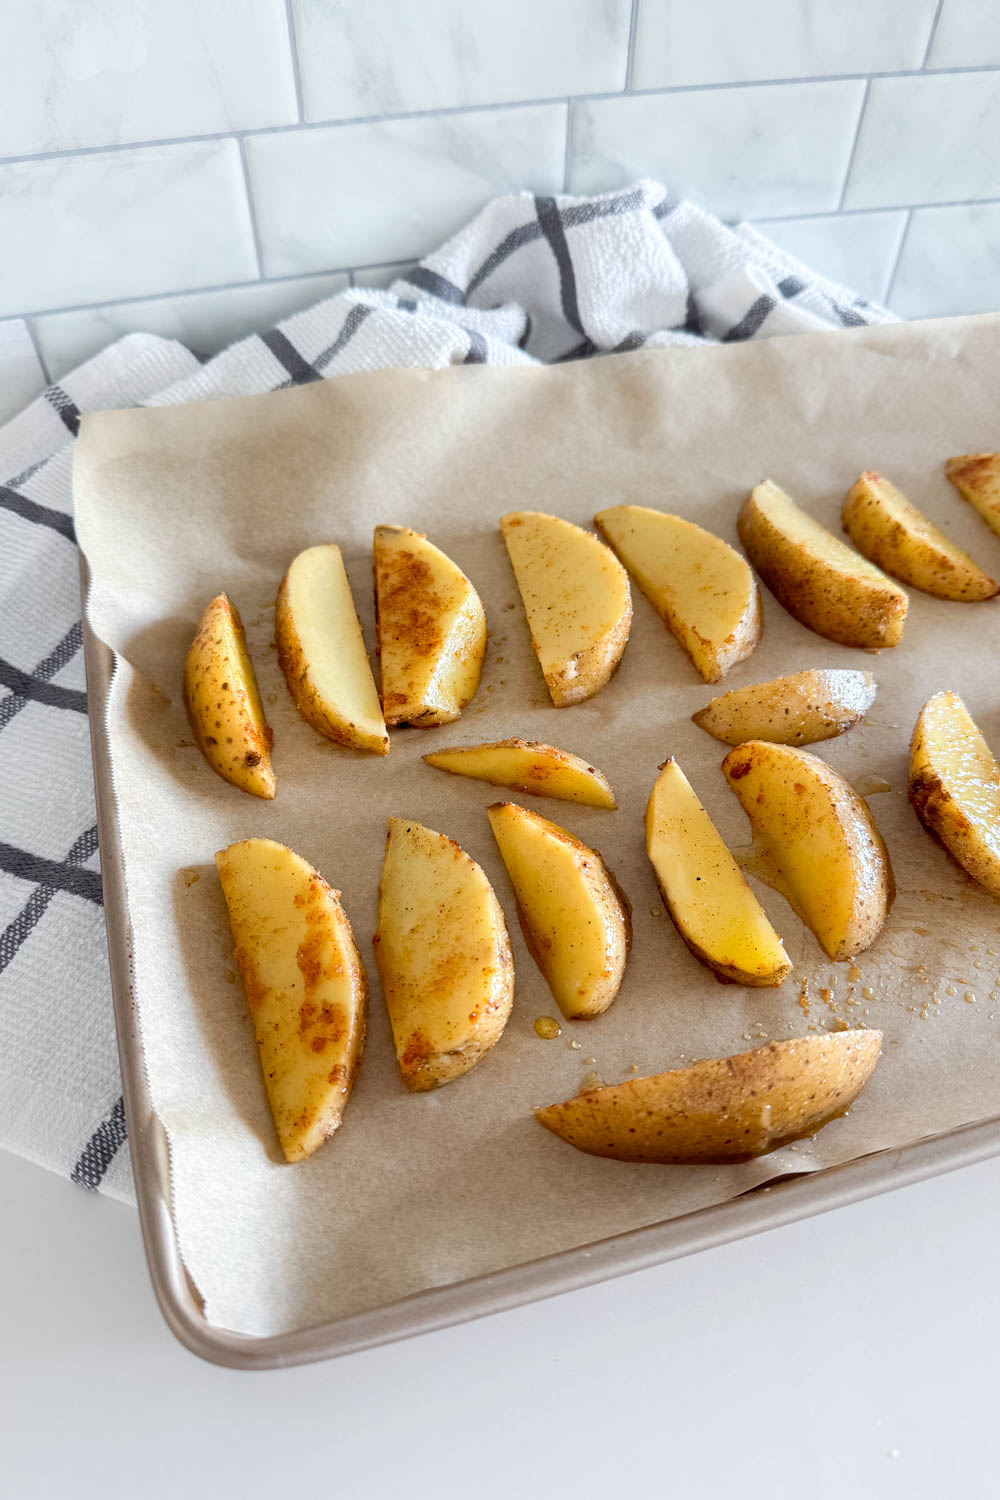 Potato wedges freshly out of the oven on a parchment-lined cookie sheet